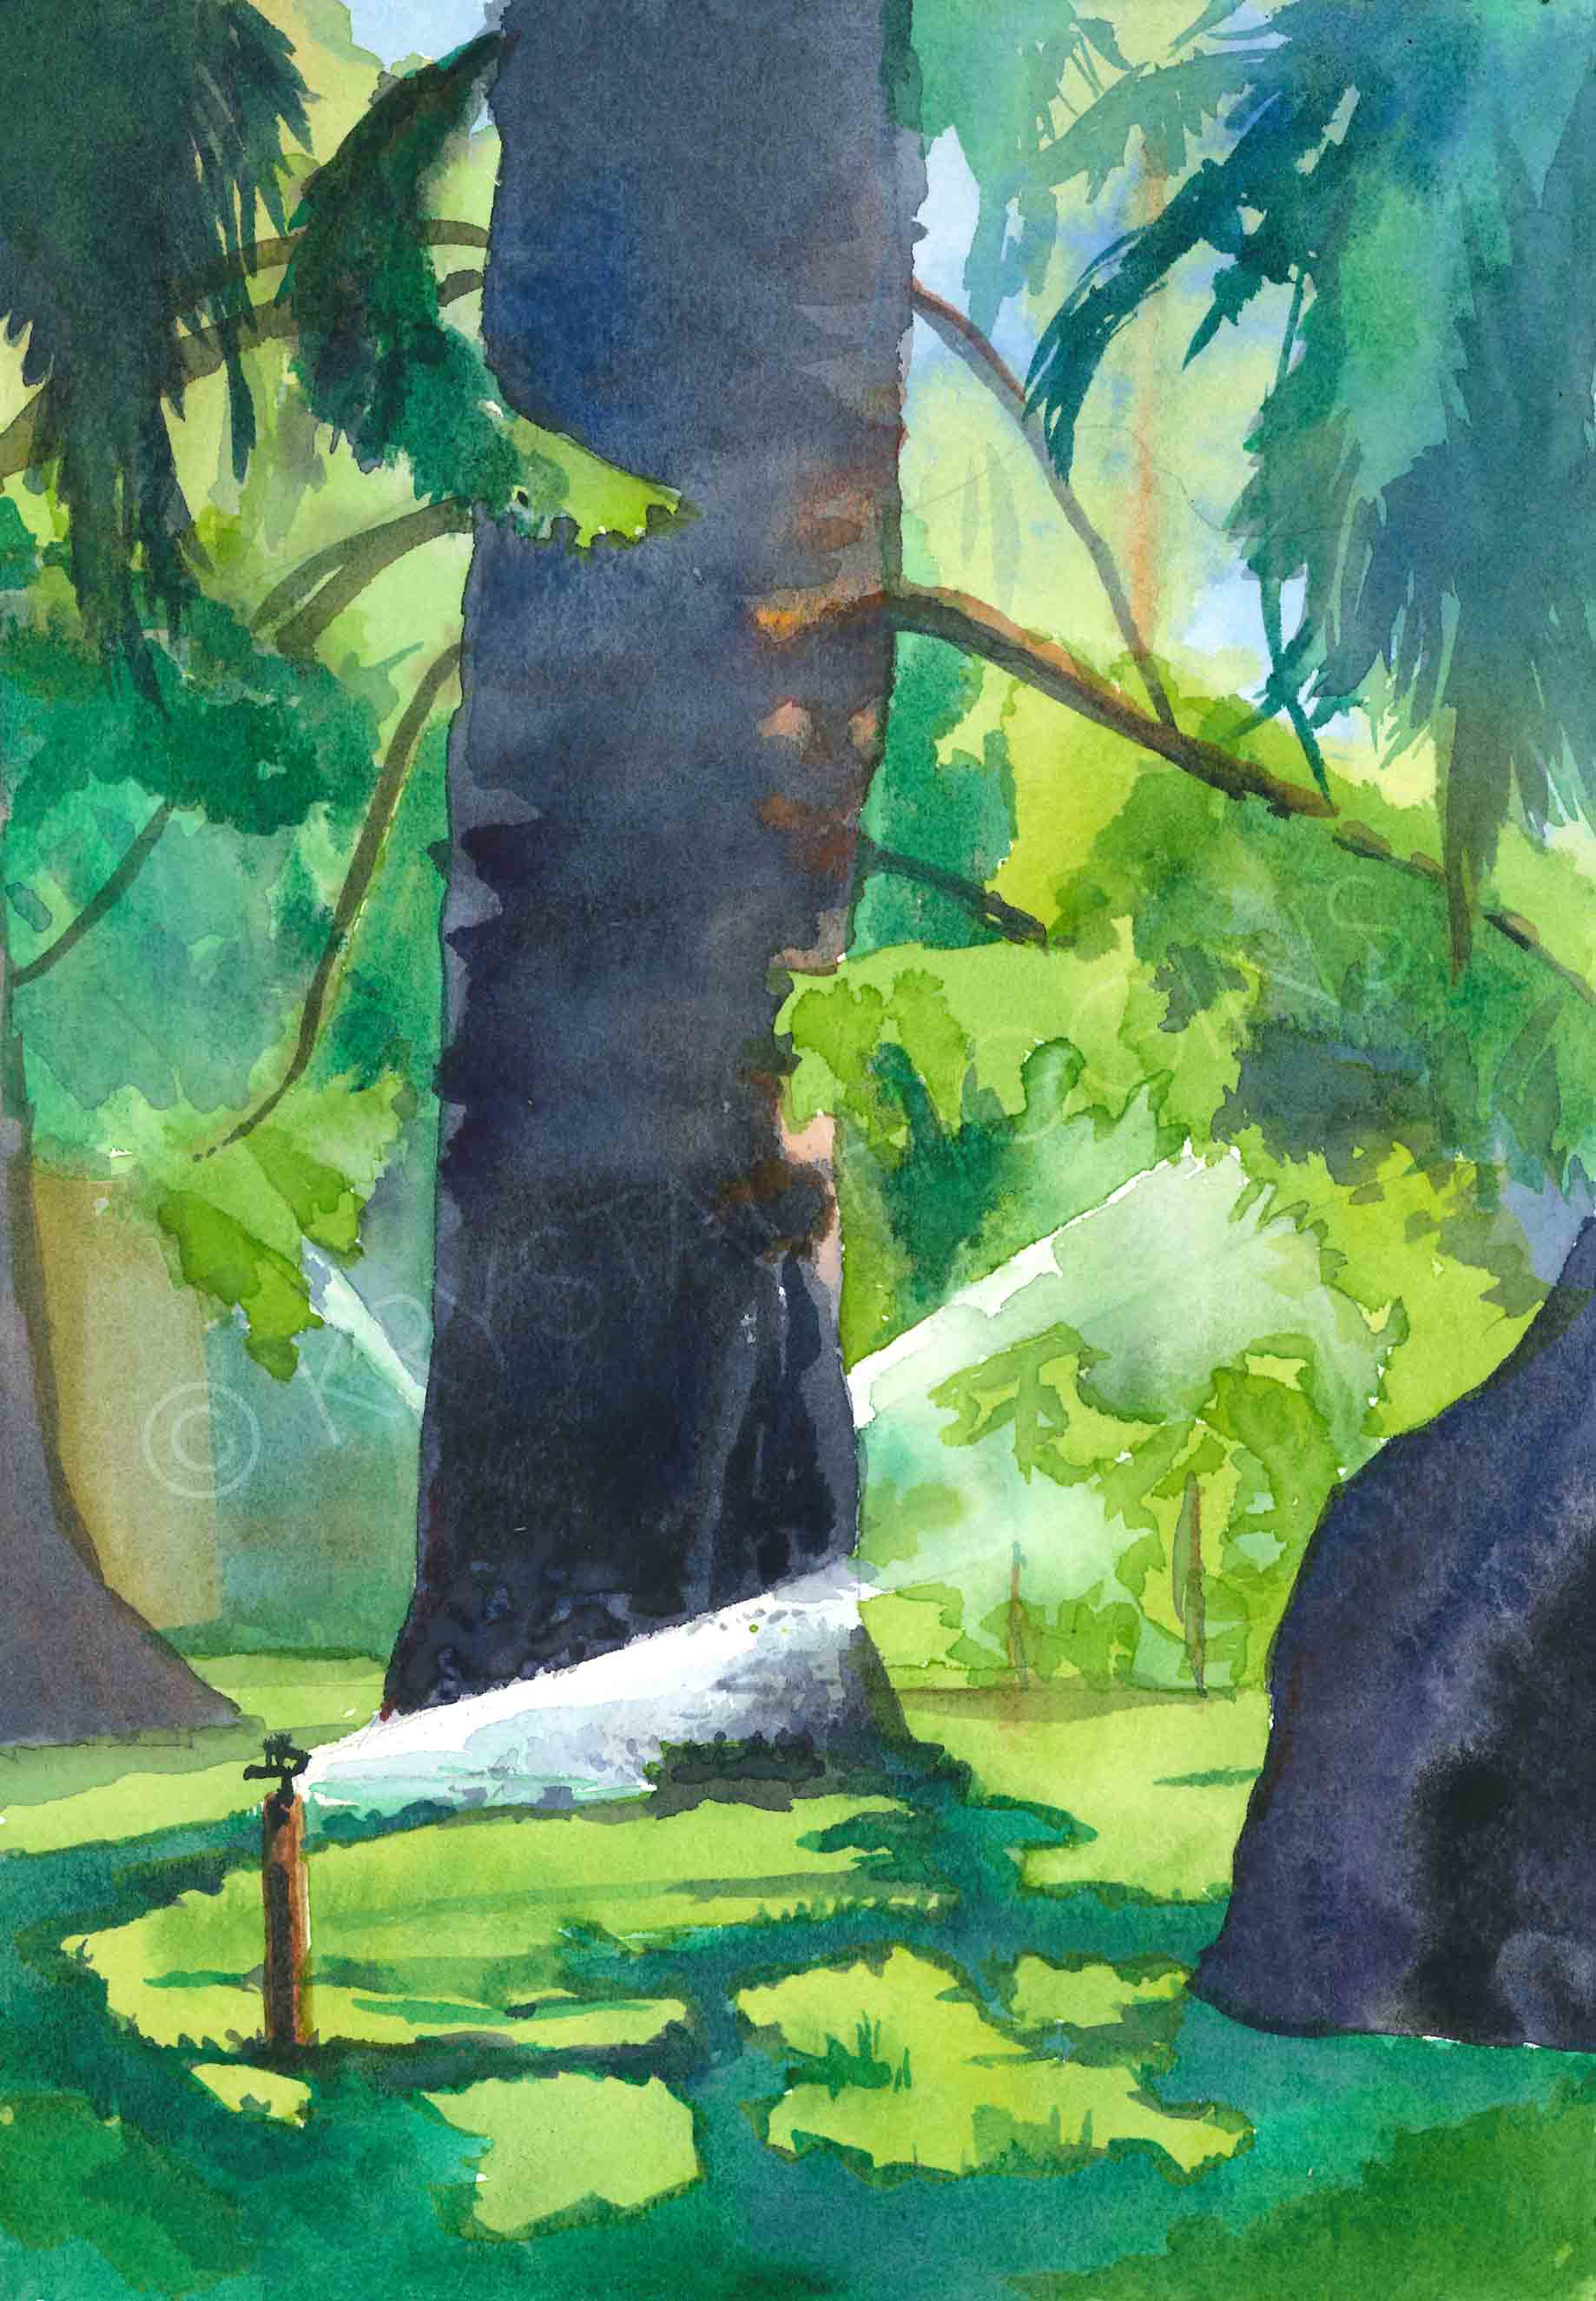 Watercolour painting of sprinklers set against the backdrop of shady trees